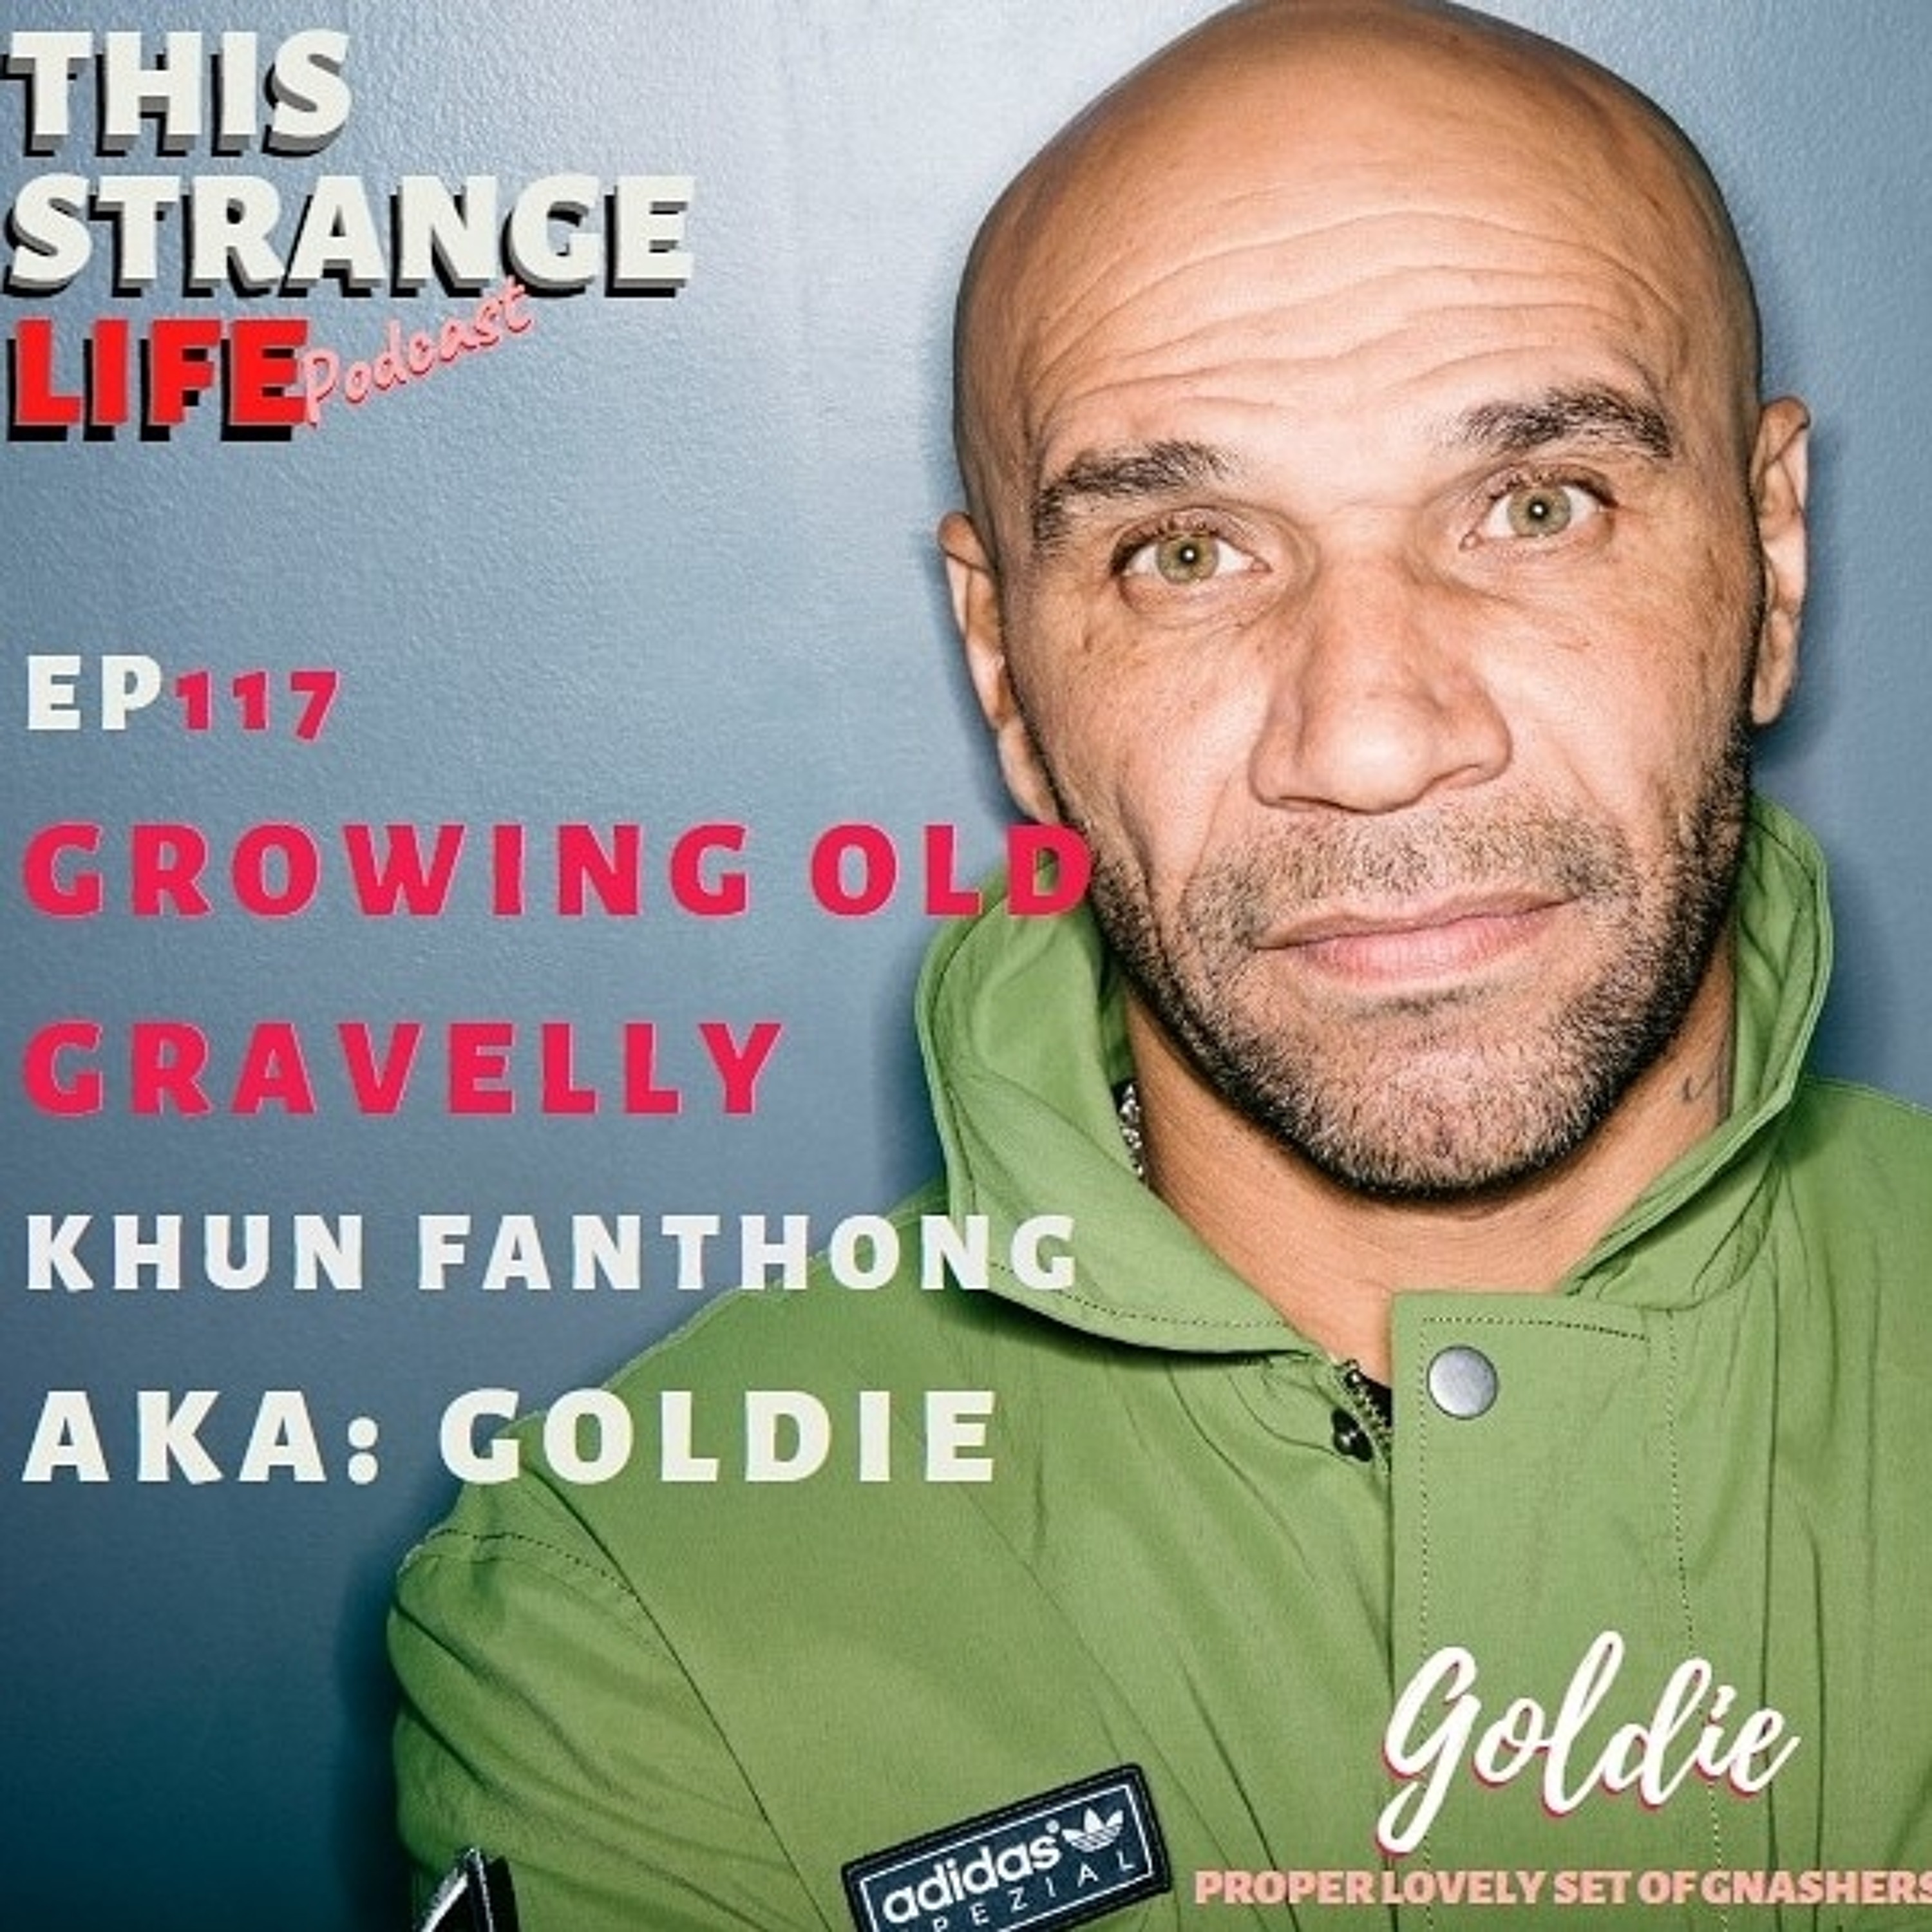 Goldie (Khun Fanthong)| Growing old gravely